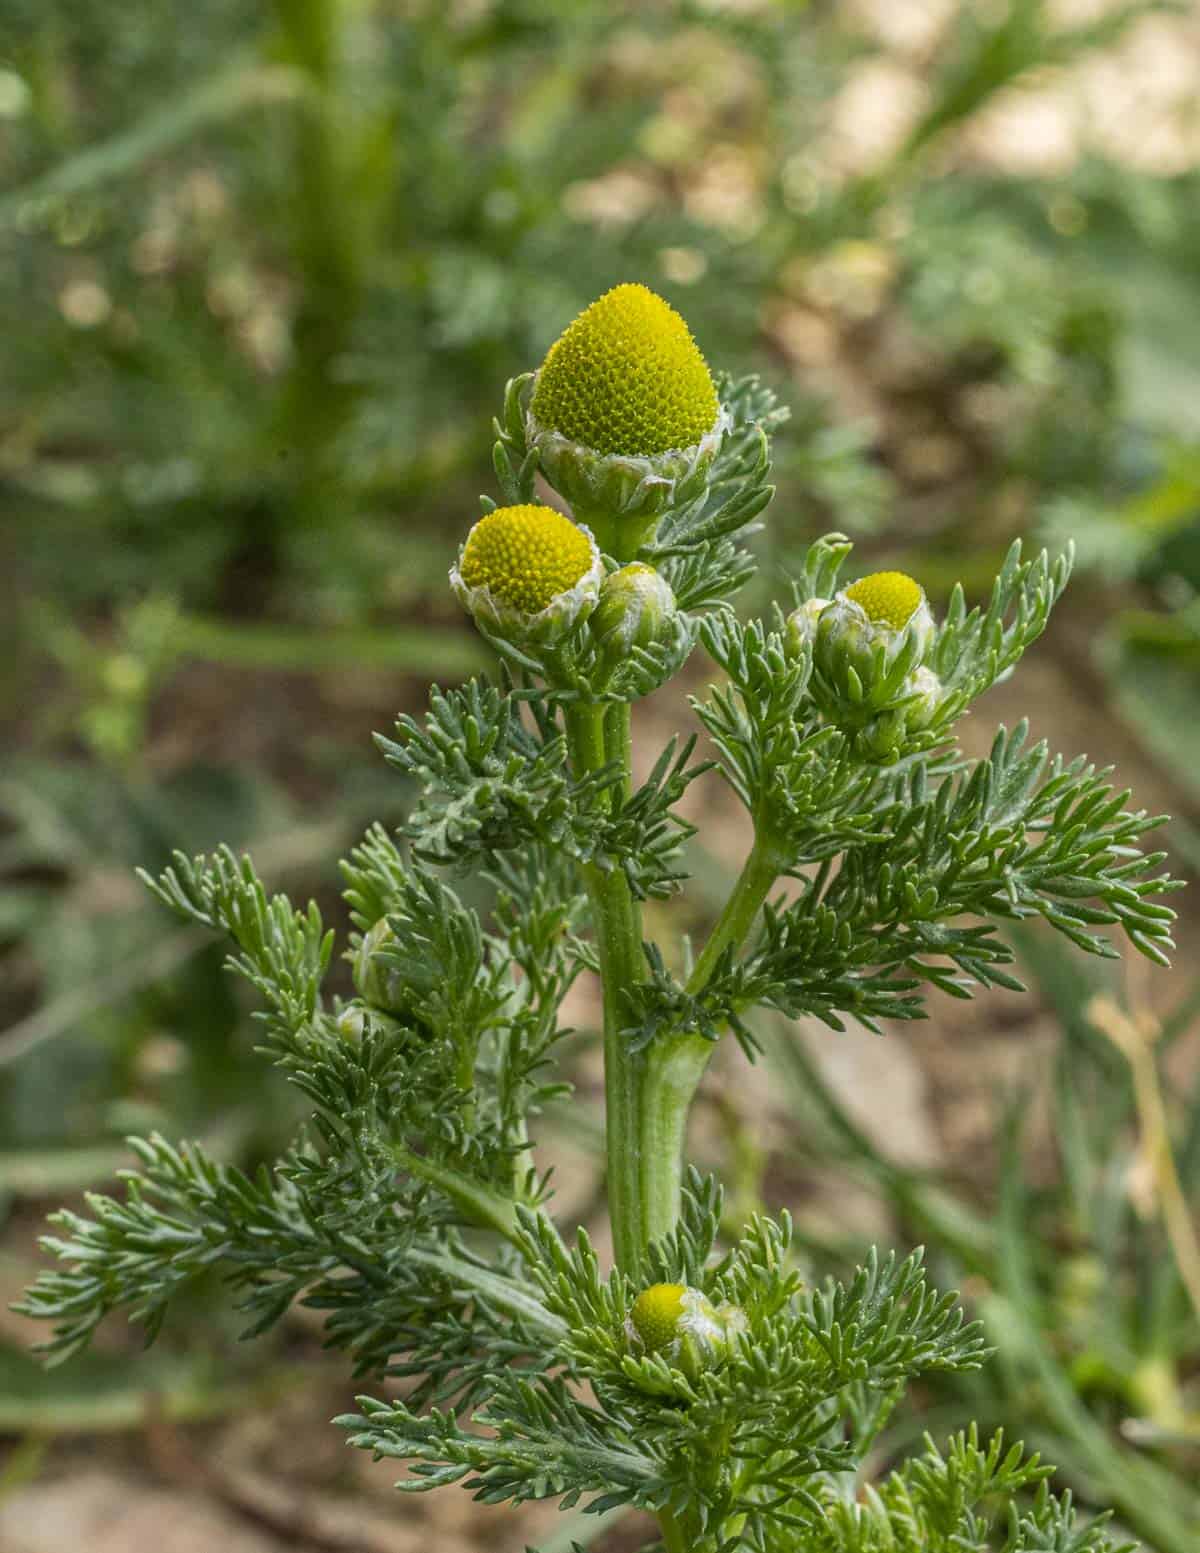 Pineapple weed or wild chamomile (Matricaria discoidea) in a driveway.